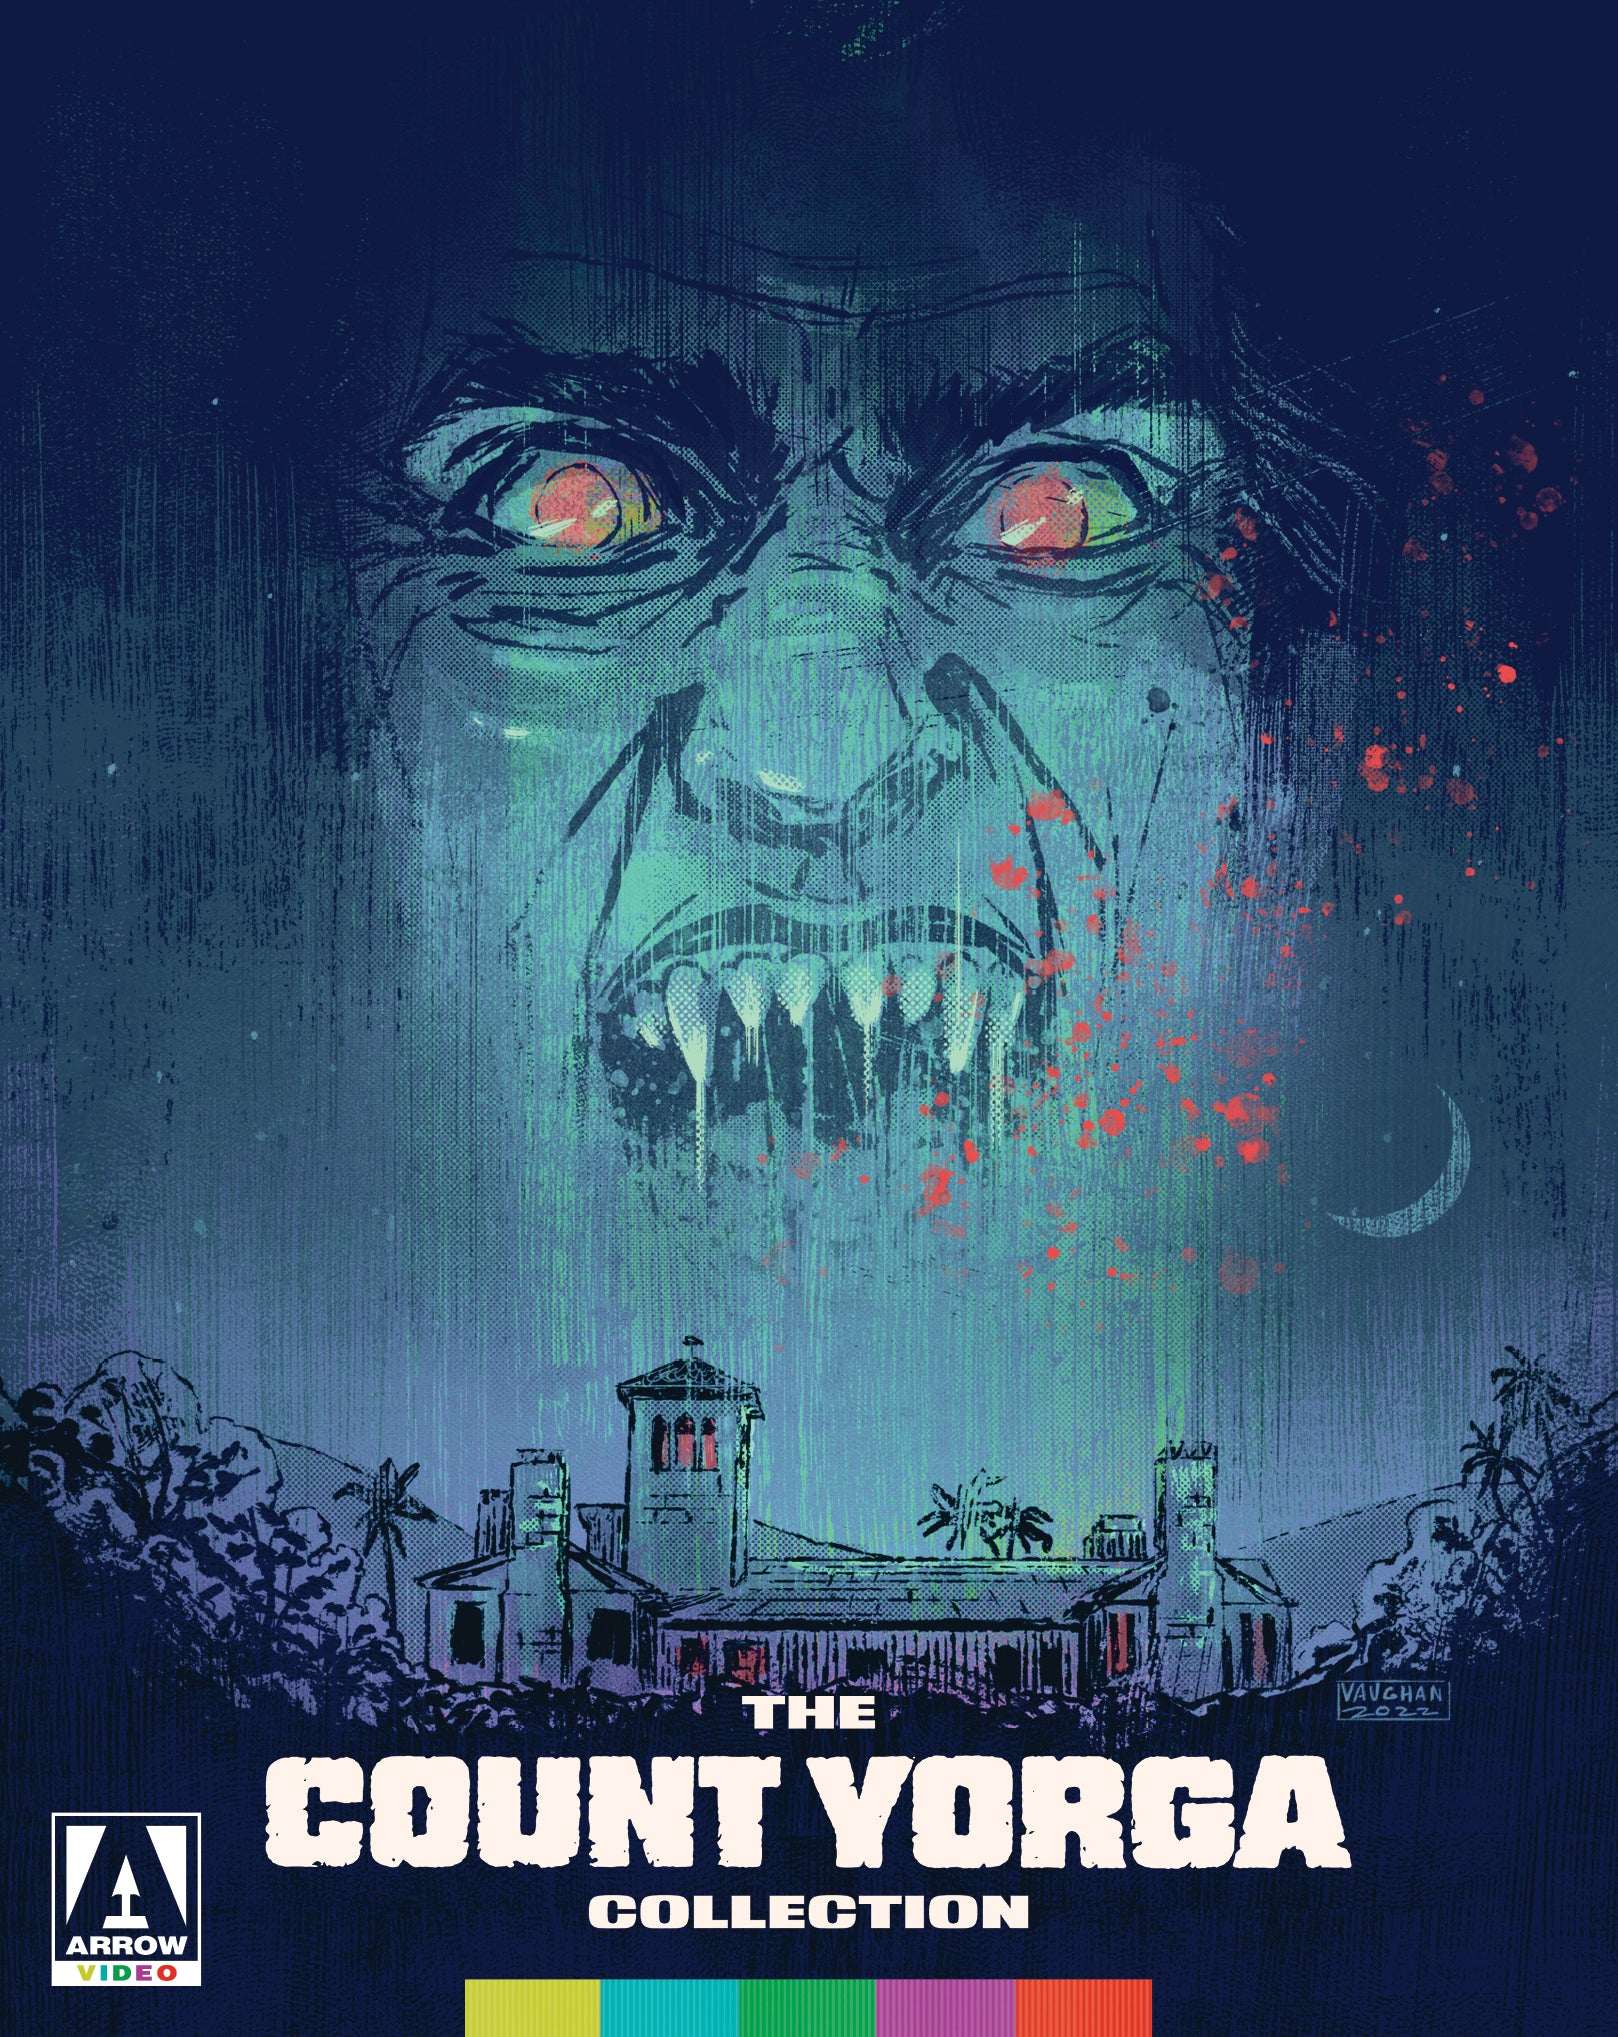 THE COUNT YORGA COLLECTION (LIMITED EDITION) BLU-RAY